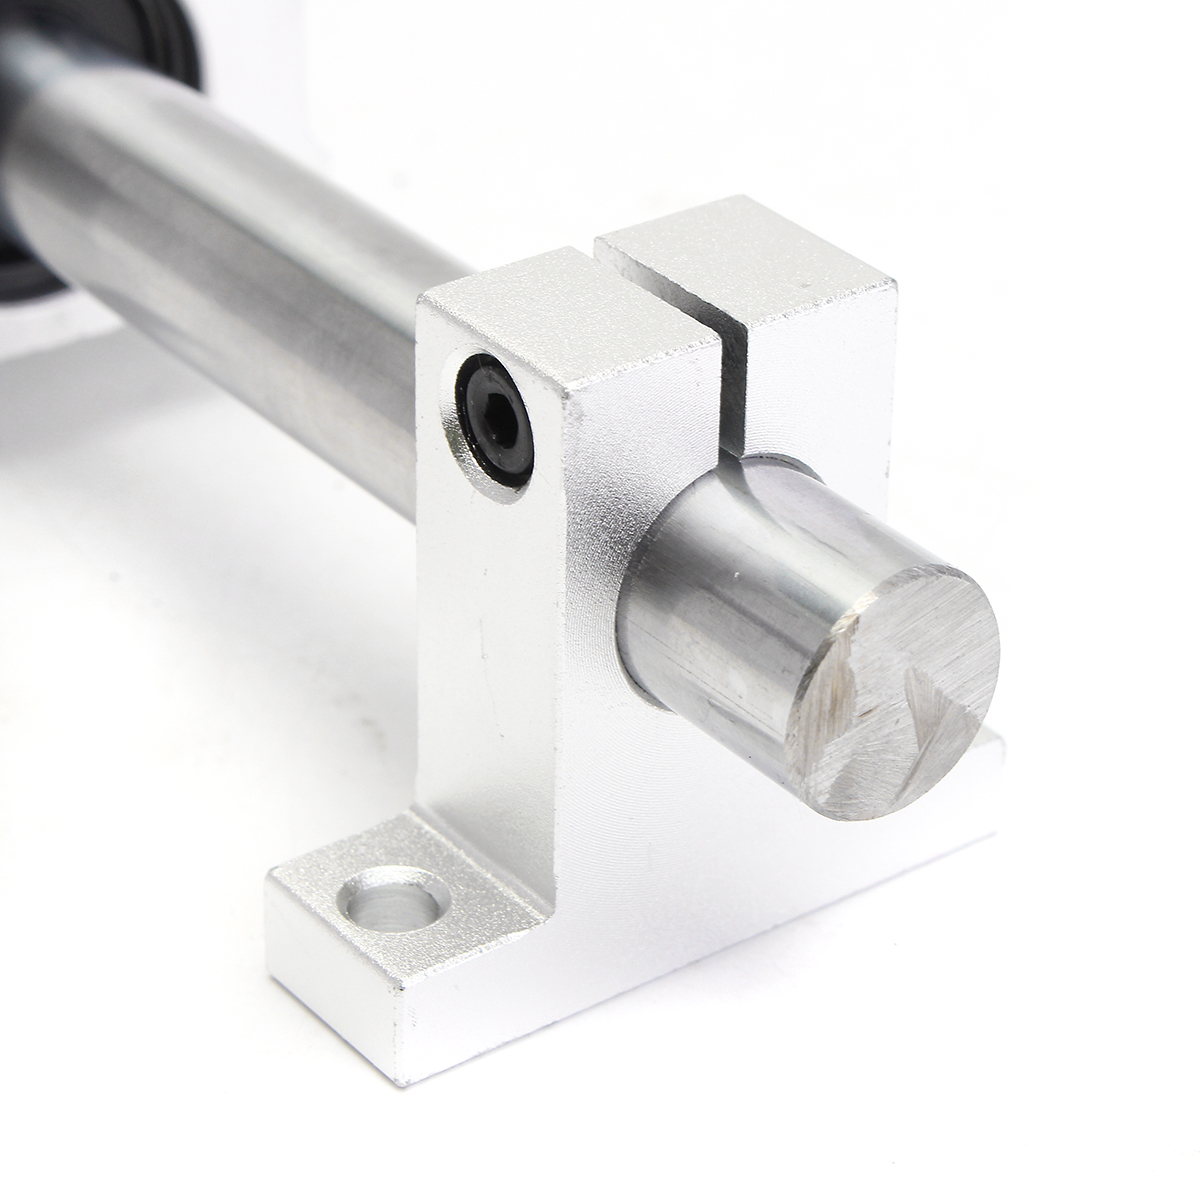 Machifit-16mm-x-1000mm-Linear-Rail-Shaft-With-Bearing-Block-and-Guide-Support-For-CNC-Parts-1390357-6